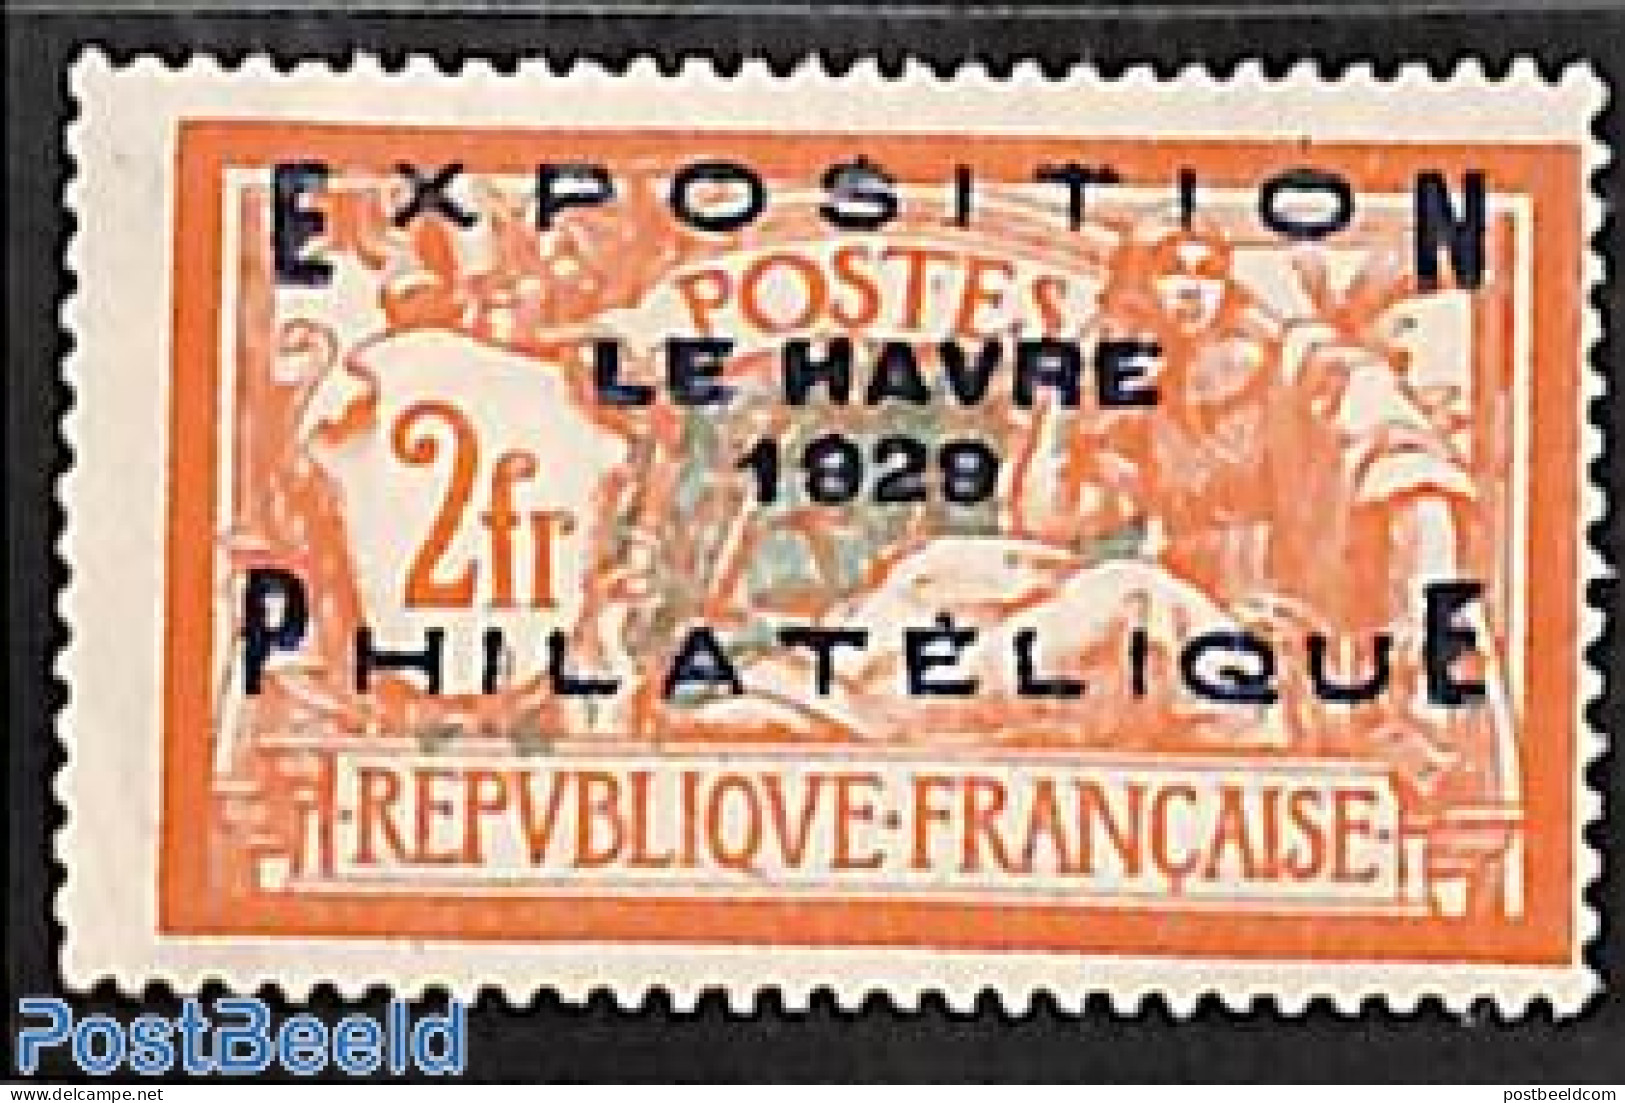 France 1929 Philatelic Exposition Le Havre 1v, Mint NH, Philately - Unused Stamps